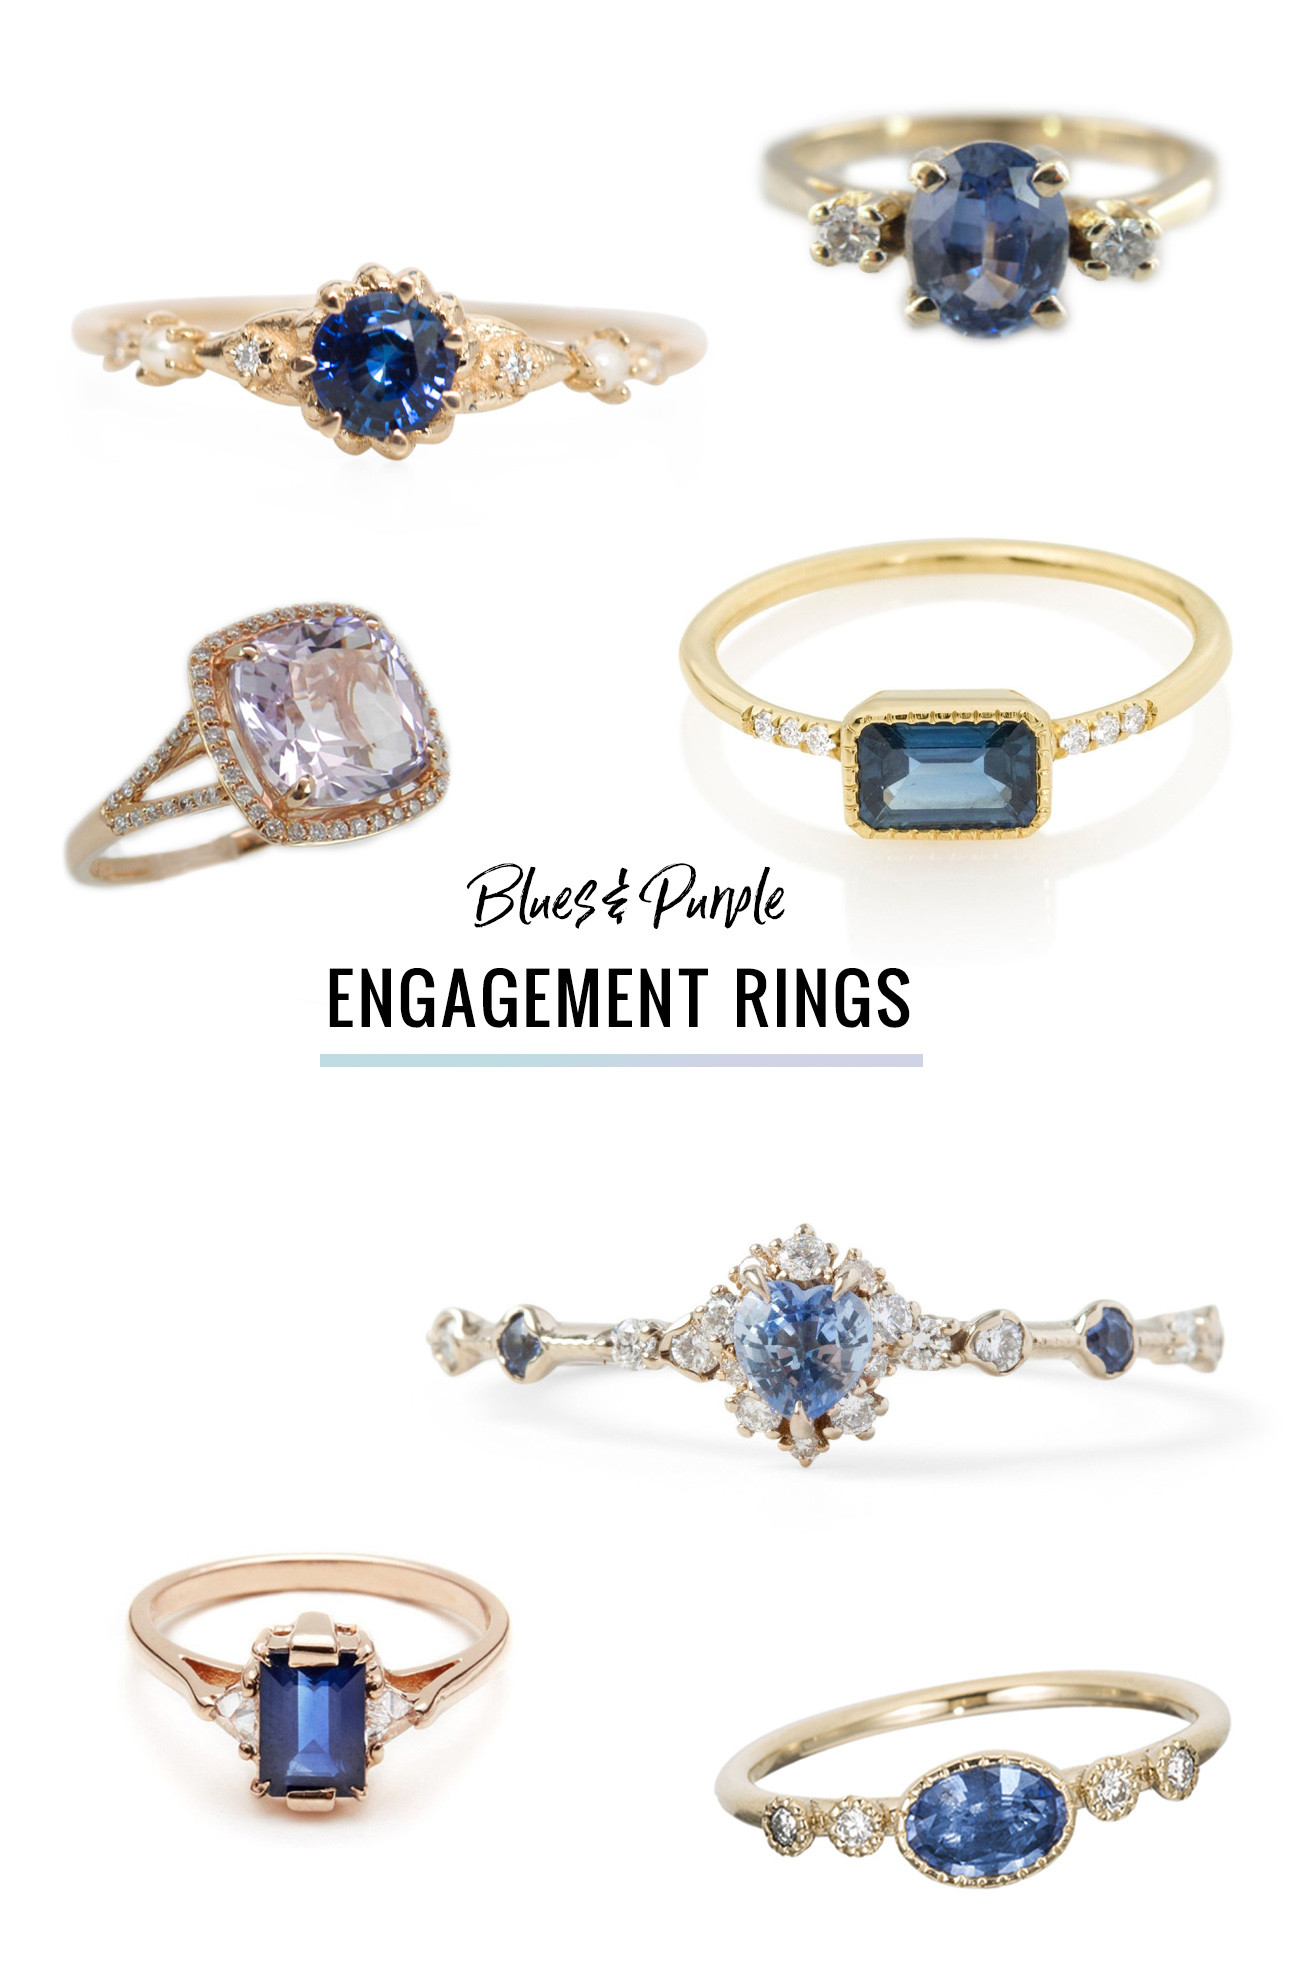 Colored Stone Wedding Rings
 Ditch the Diamond — Alternative Engagement Rings Featuring